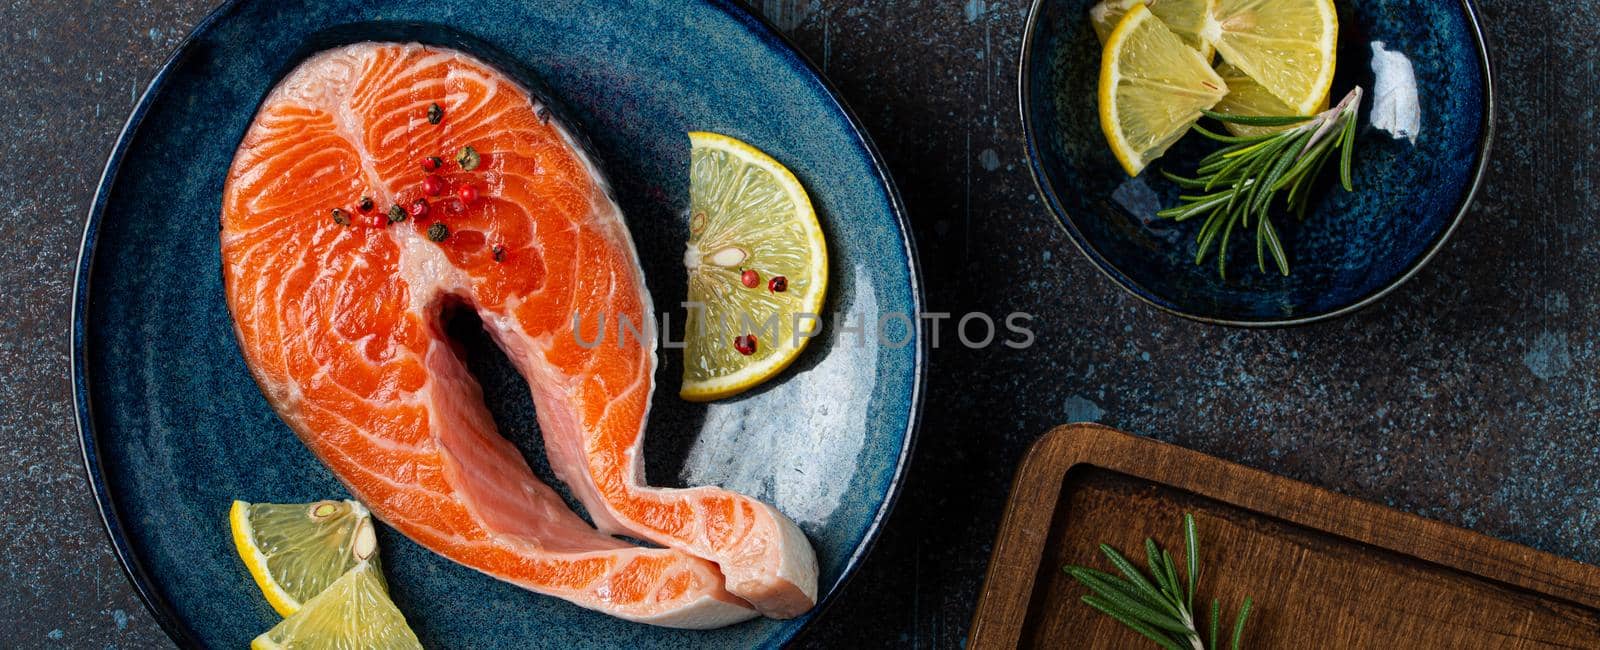 Uncooked raw fresh fish salmon steak top view on plate rustic dark concrete stone background with rosemary, lemon wedges and spices, delicacy healthy fish cooking and nutrition concept flat lay